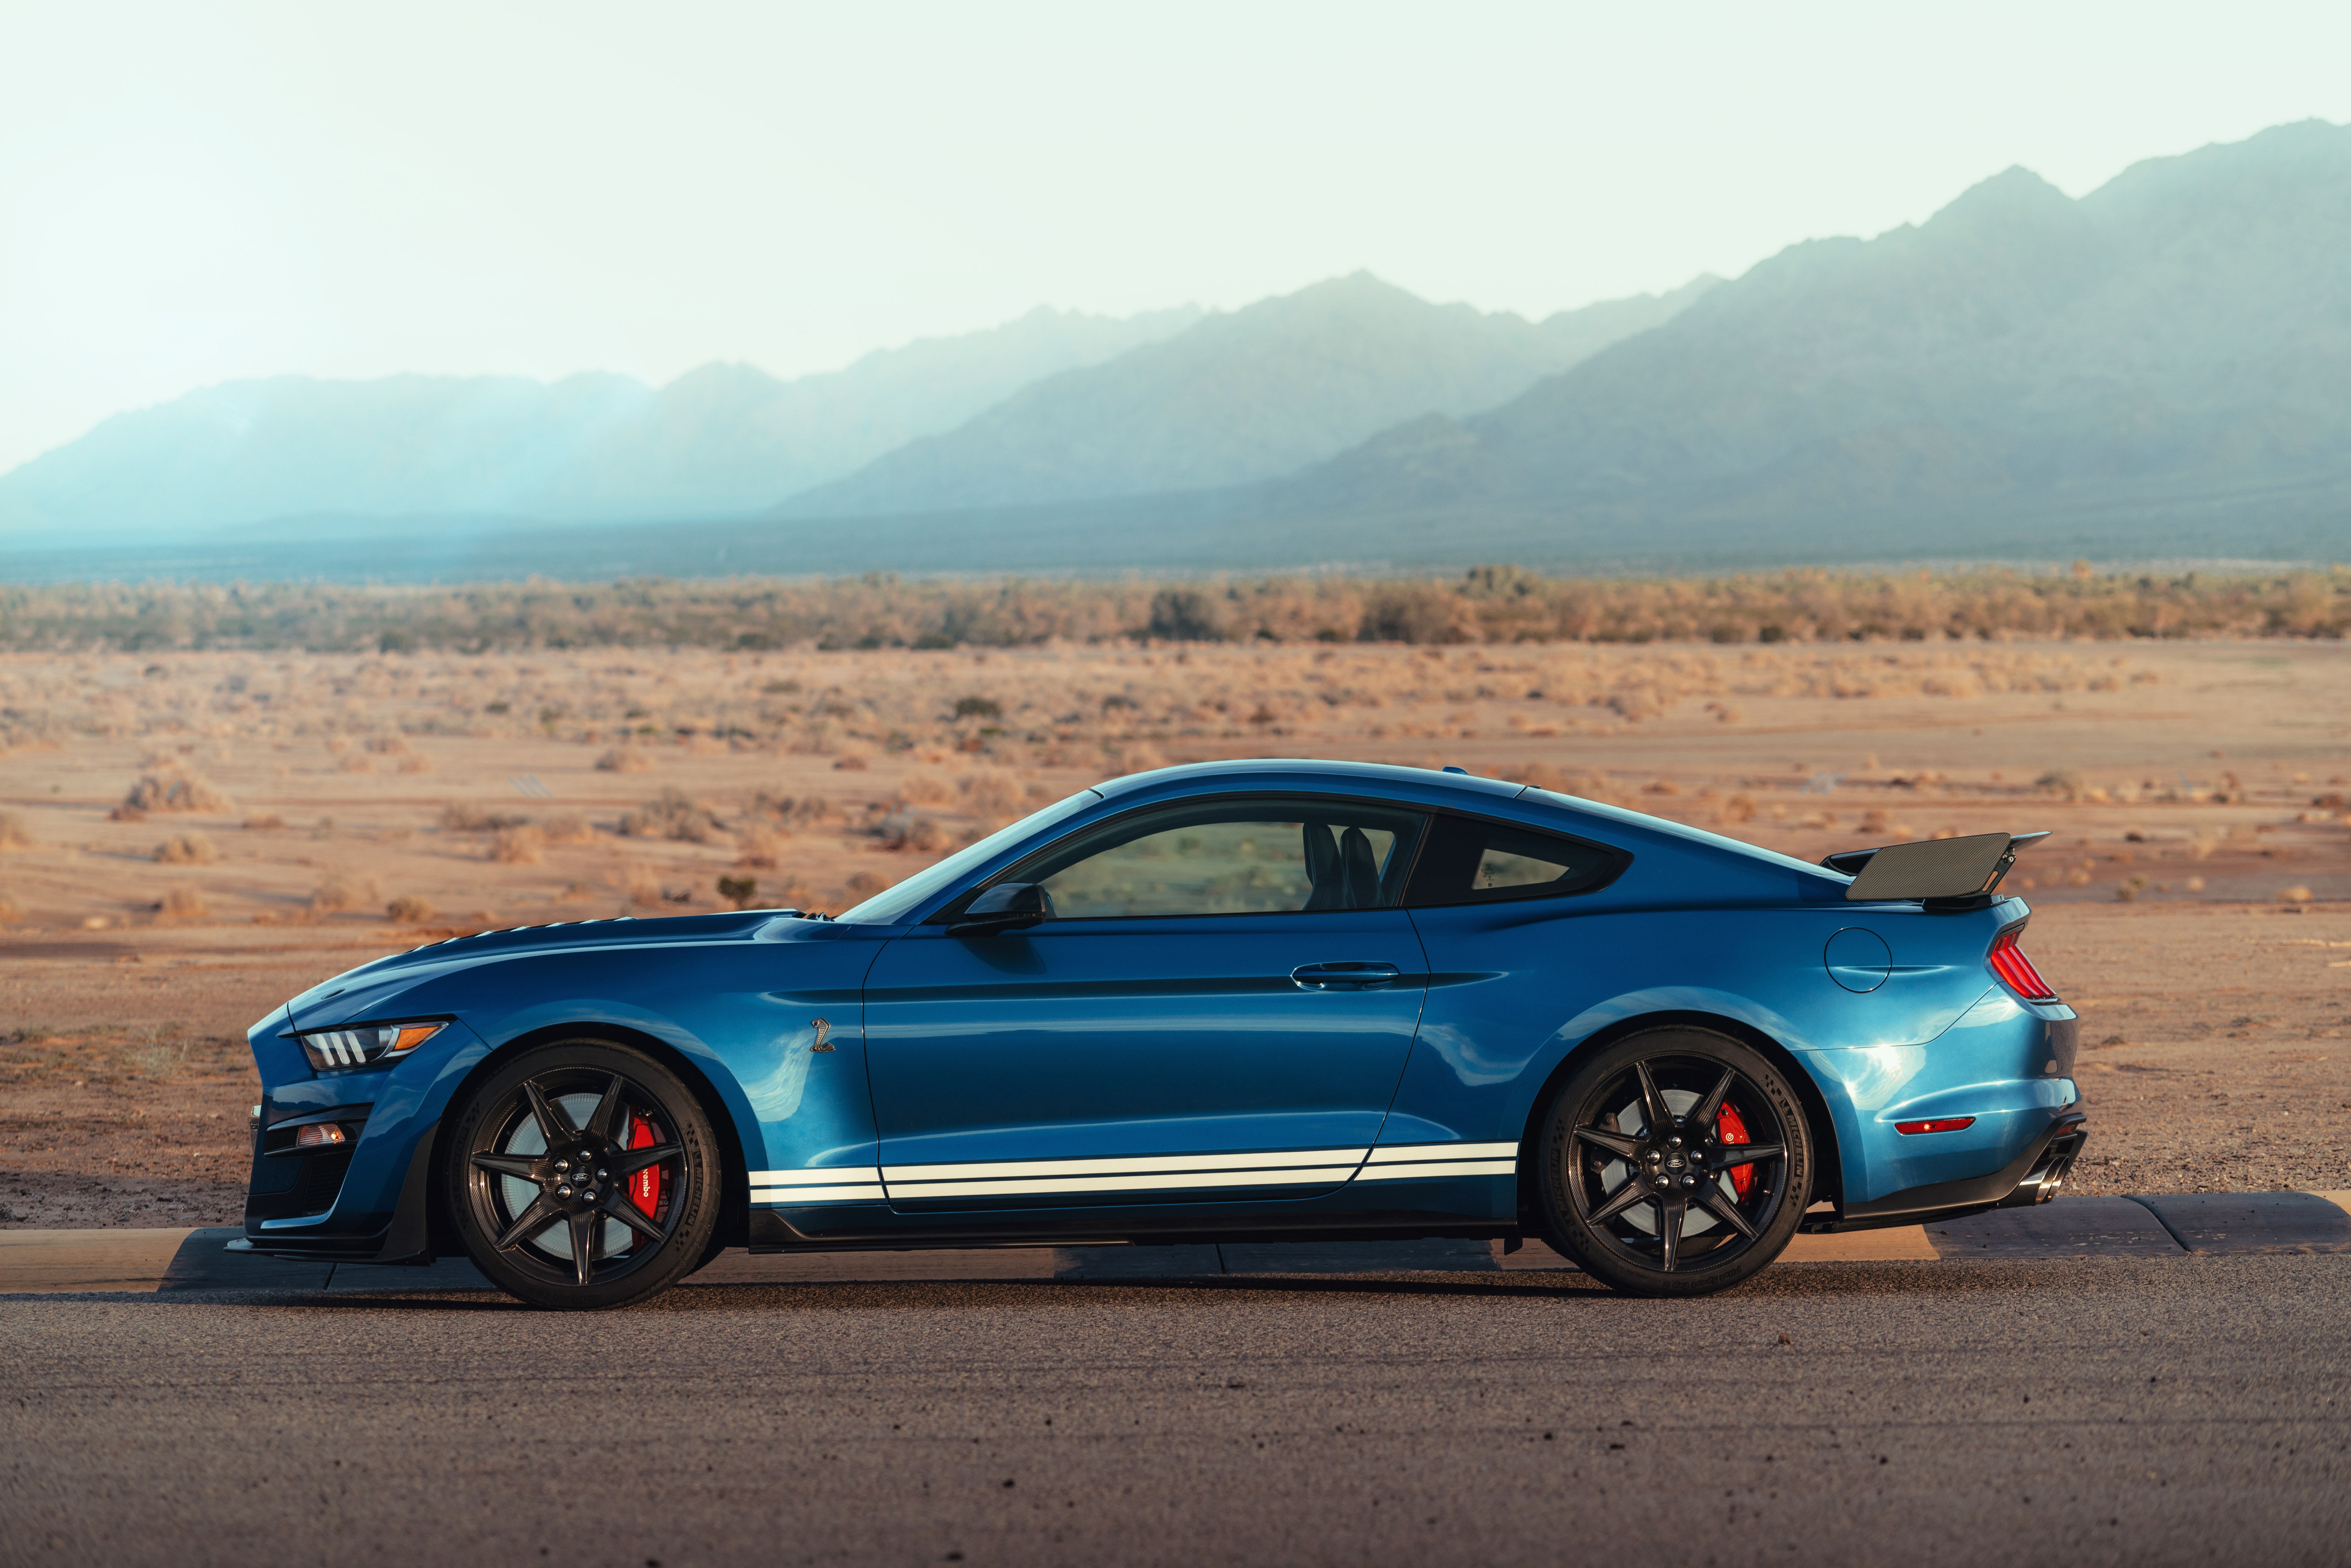 Unleash the Speed: Top 10 High-Performance Cars for Thrill-Seekers - Ford Mustang Shelby GT500